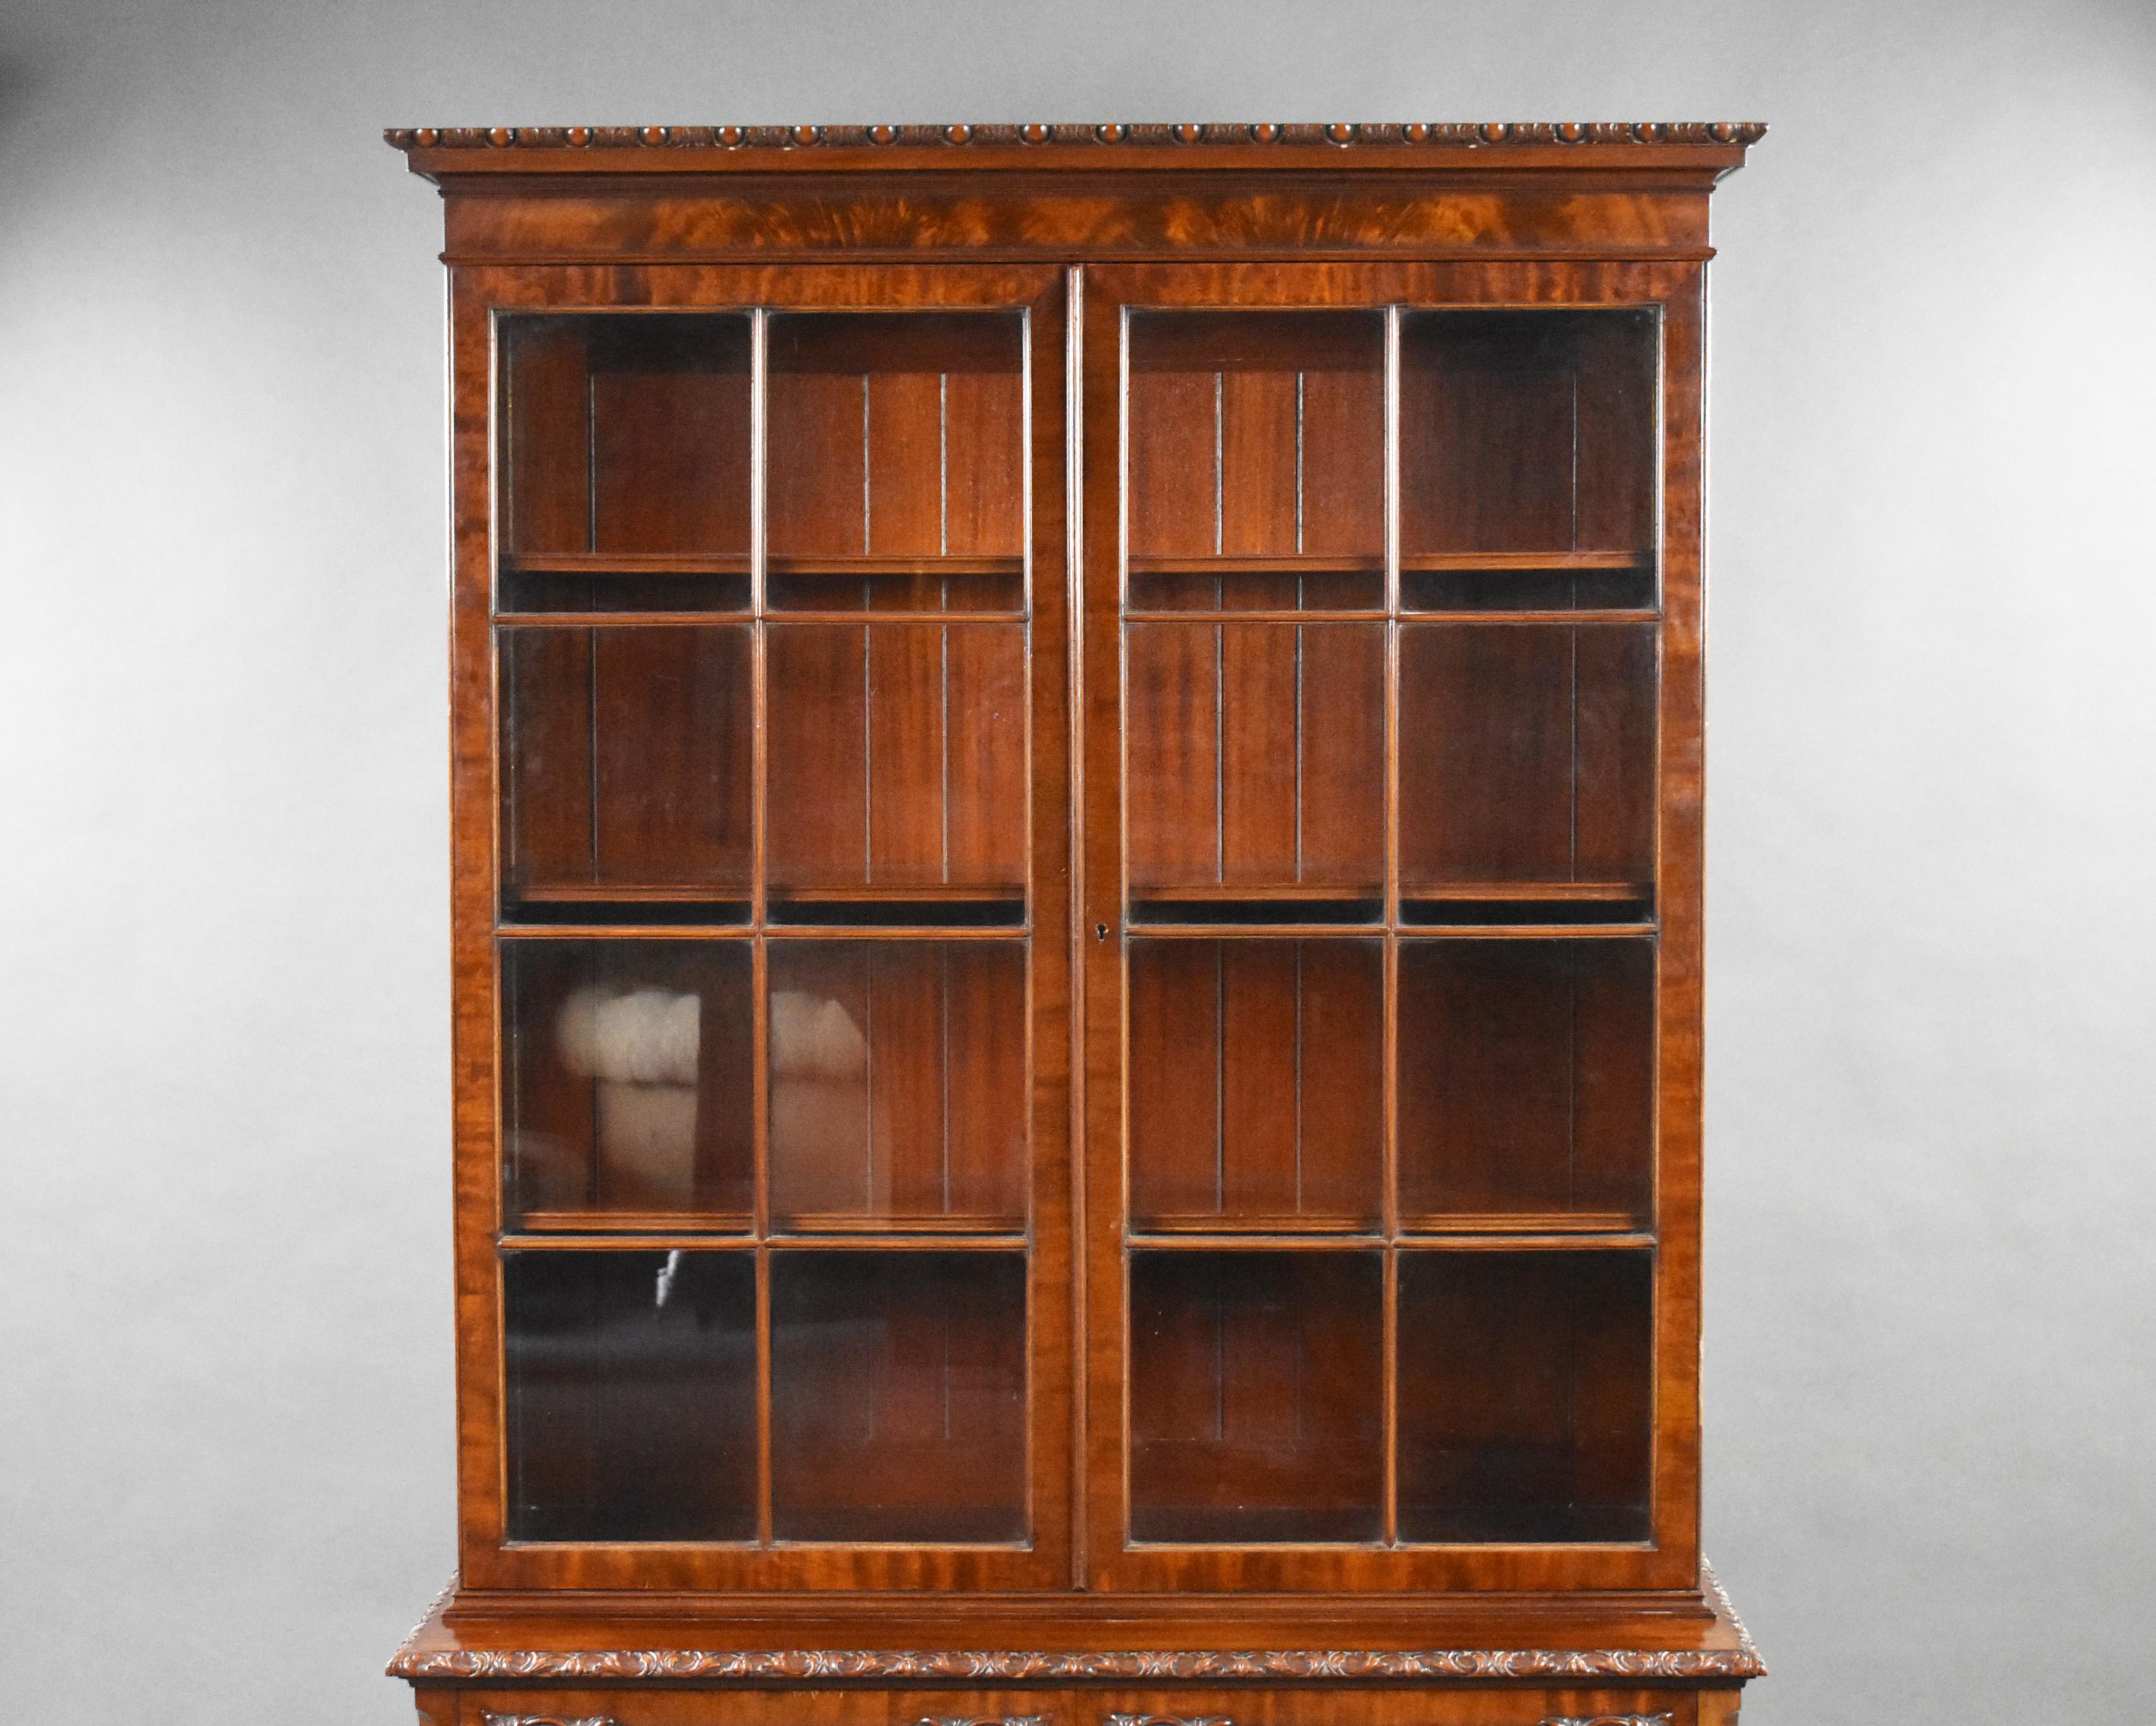 Chippendale 20th Century English Edwardian Mahogany Bookcase by Waring & Gillows